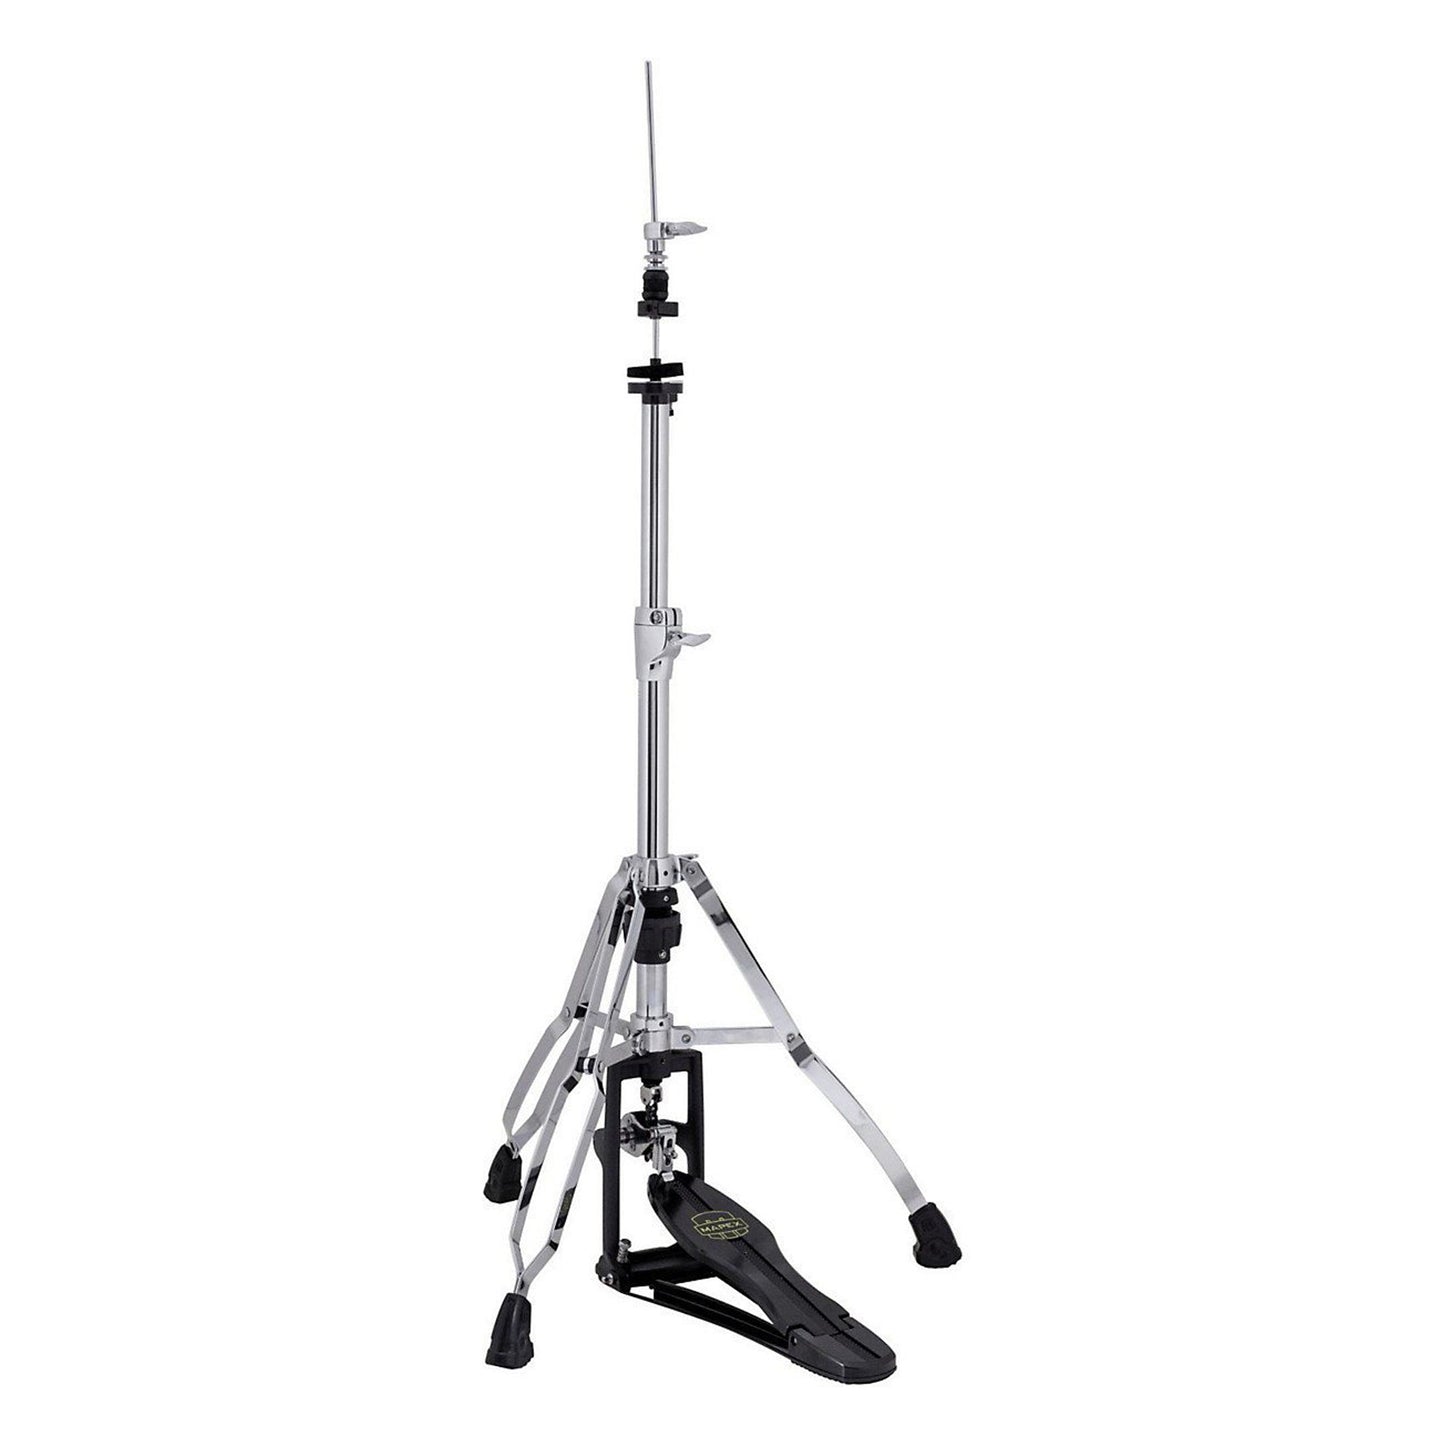 Mapex Armory Series Hi-Hat Stand - Chrome Plated